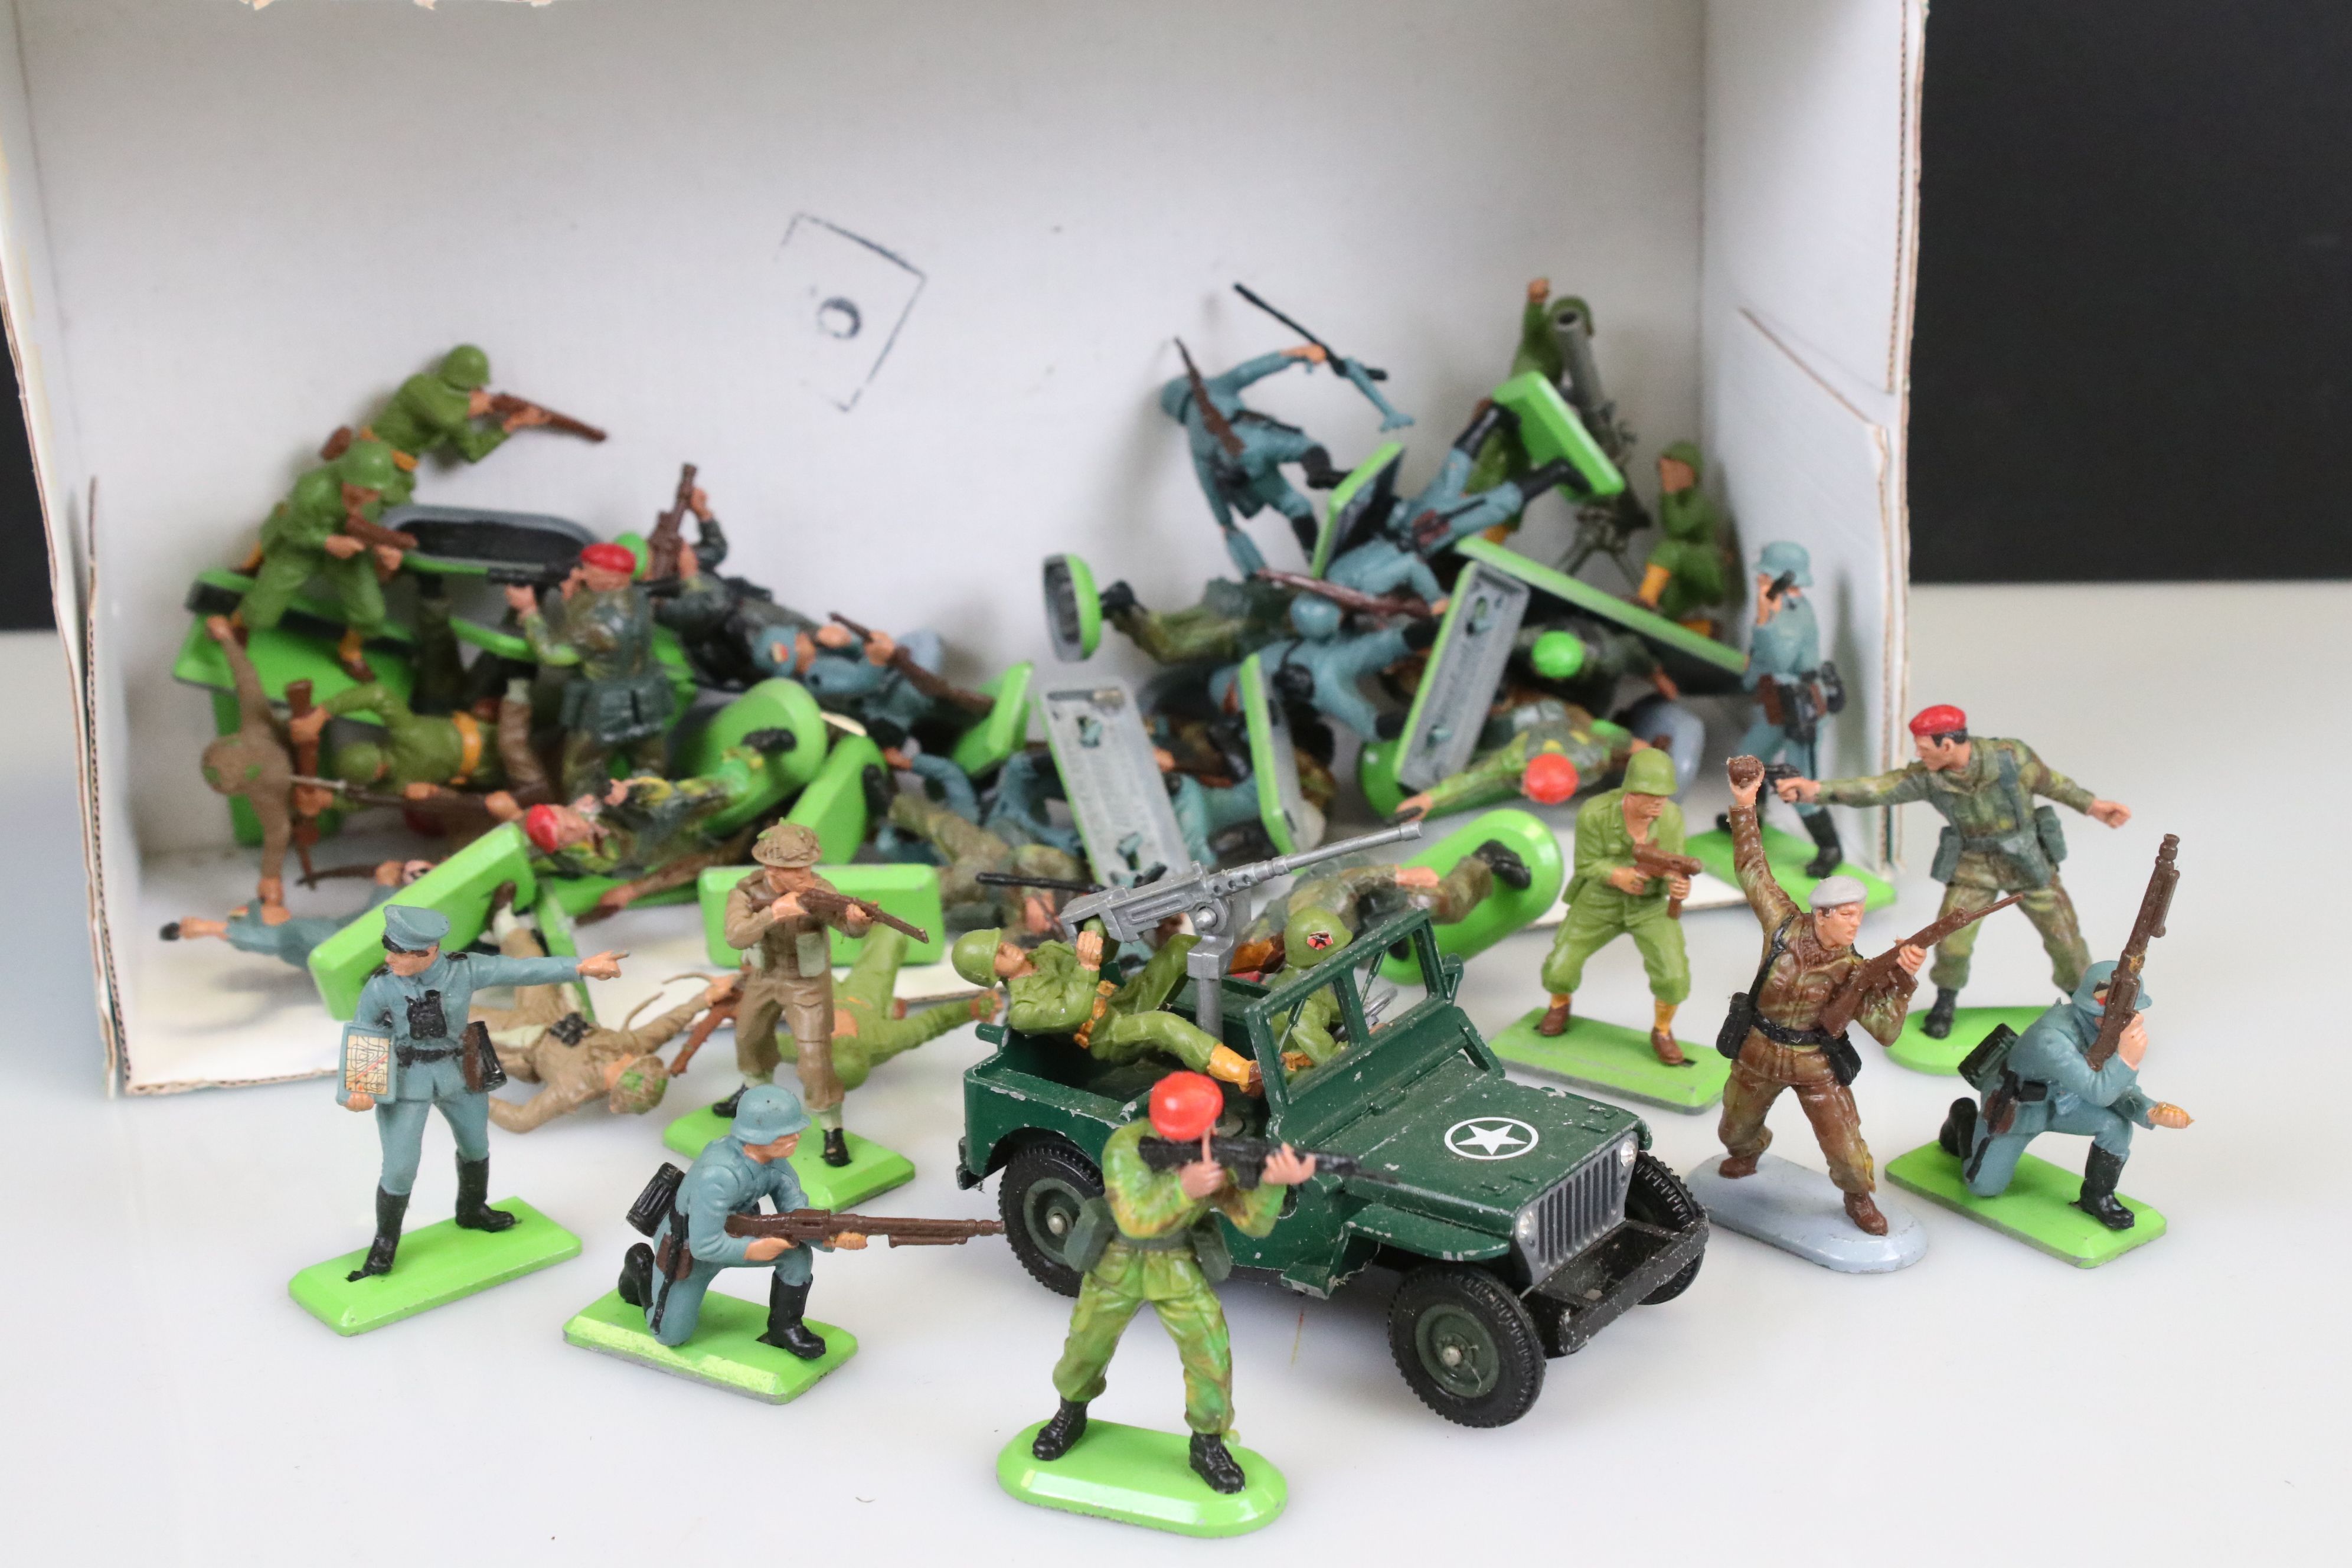 Around 38 Britains Deetail military figures plus a Britains Jeep diecast model with 2 x soldiers